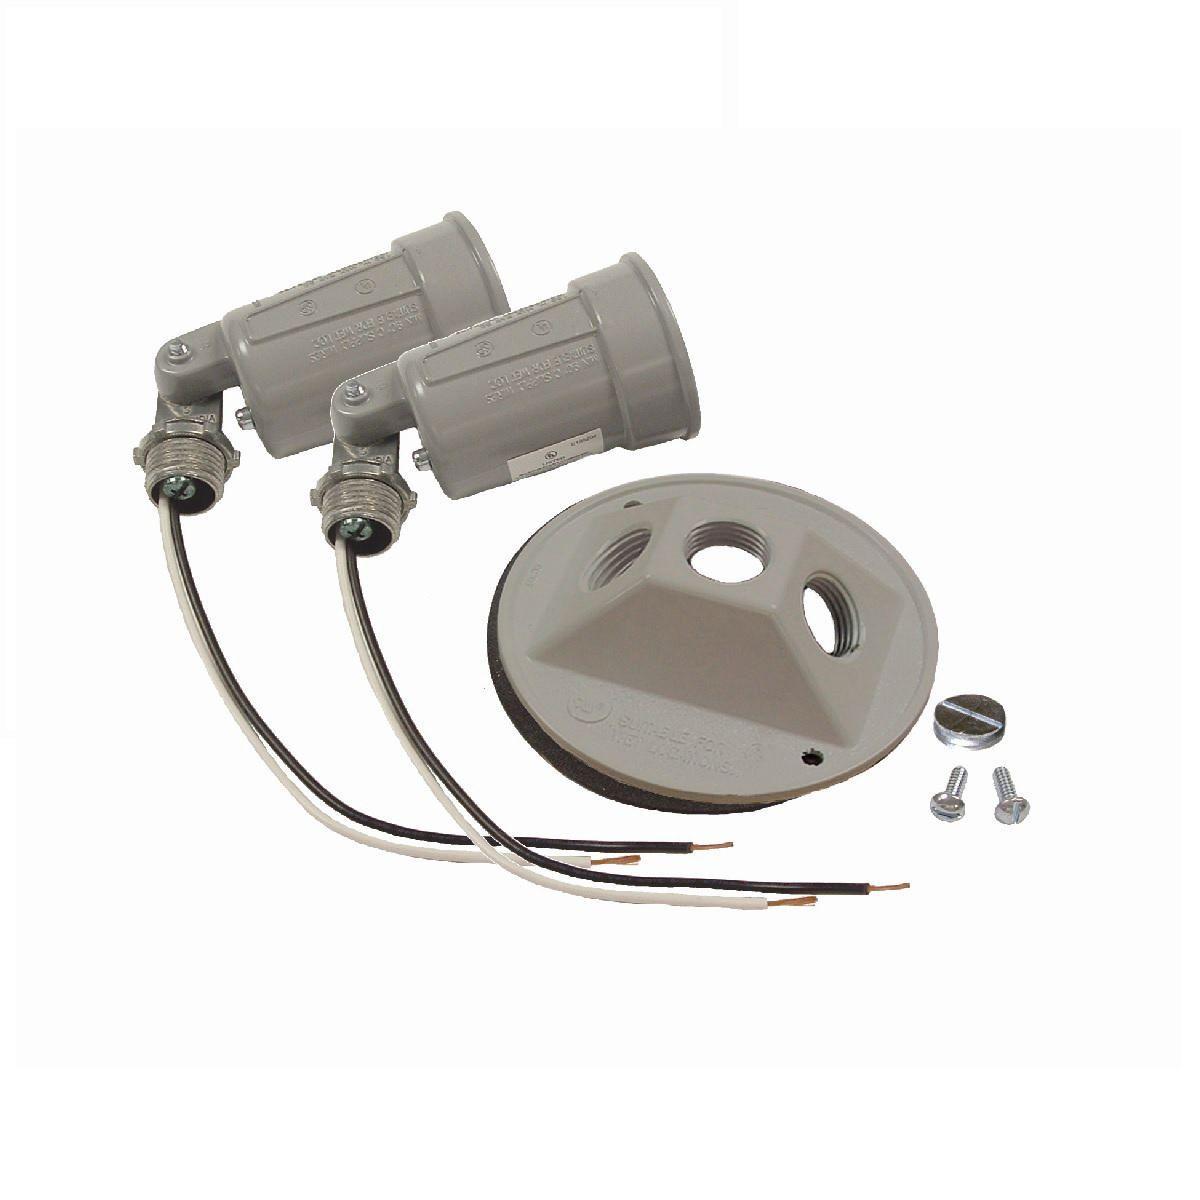 Hubbell 5625-0 4 in. Round Weatherproof Combination Cover for 75-150W Par 38 Lamps, Includes 2 Lampholders, Gasket, and Hardware, Gray  ; Rugged die cast constructions. ; State-of-the-art powder coat finish provides maximum weatherability and scratch resistance. ; Locki